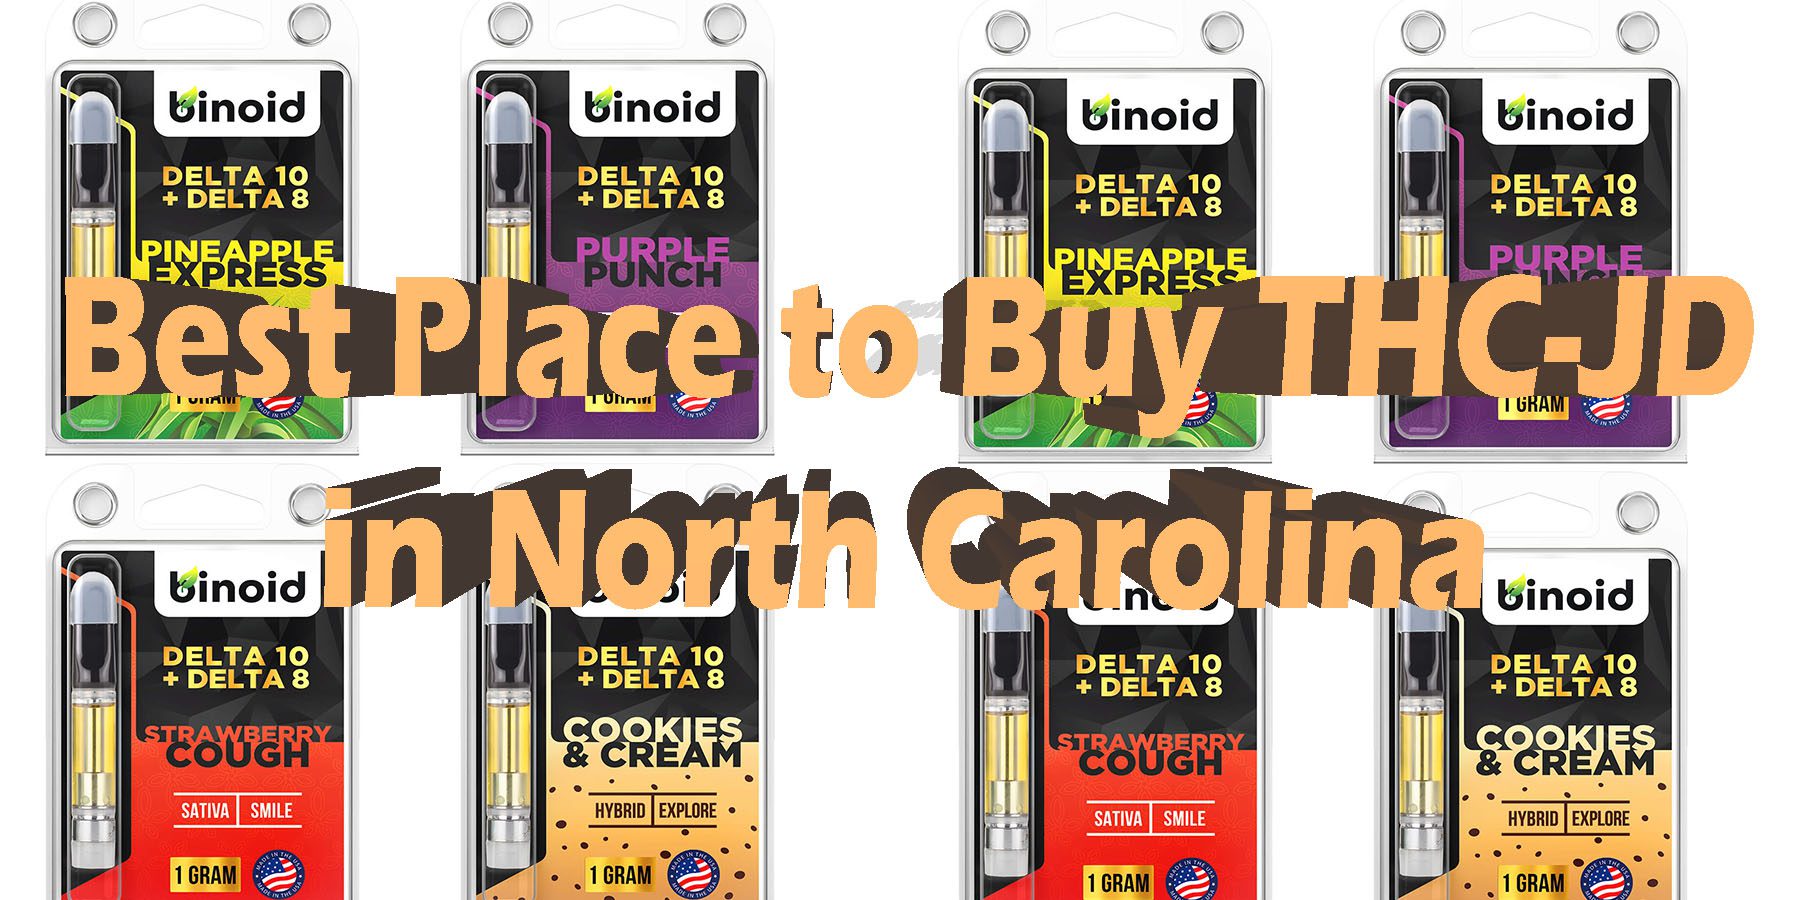 Best Place to Buy THC JD in North Carolina THC JD In North Carolina HowToGetNearMe BestPlace LowestPrice Coupon Discount For Smoking Best Brand D9 D8 THCA